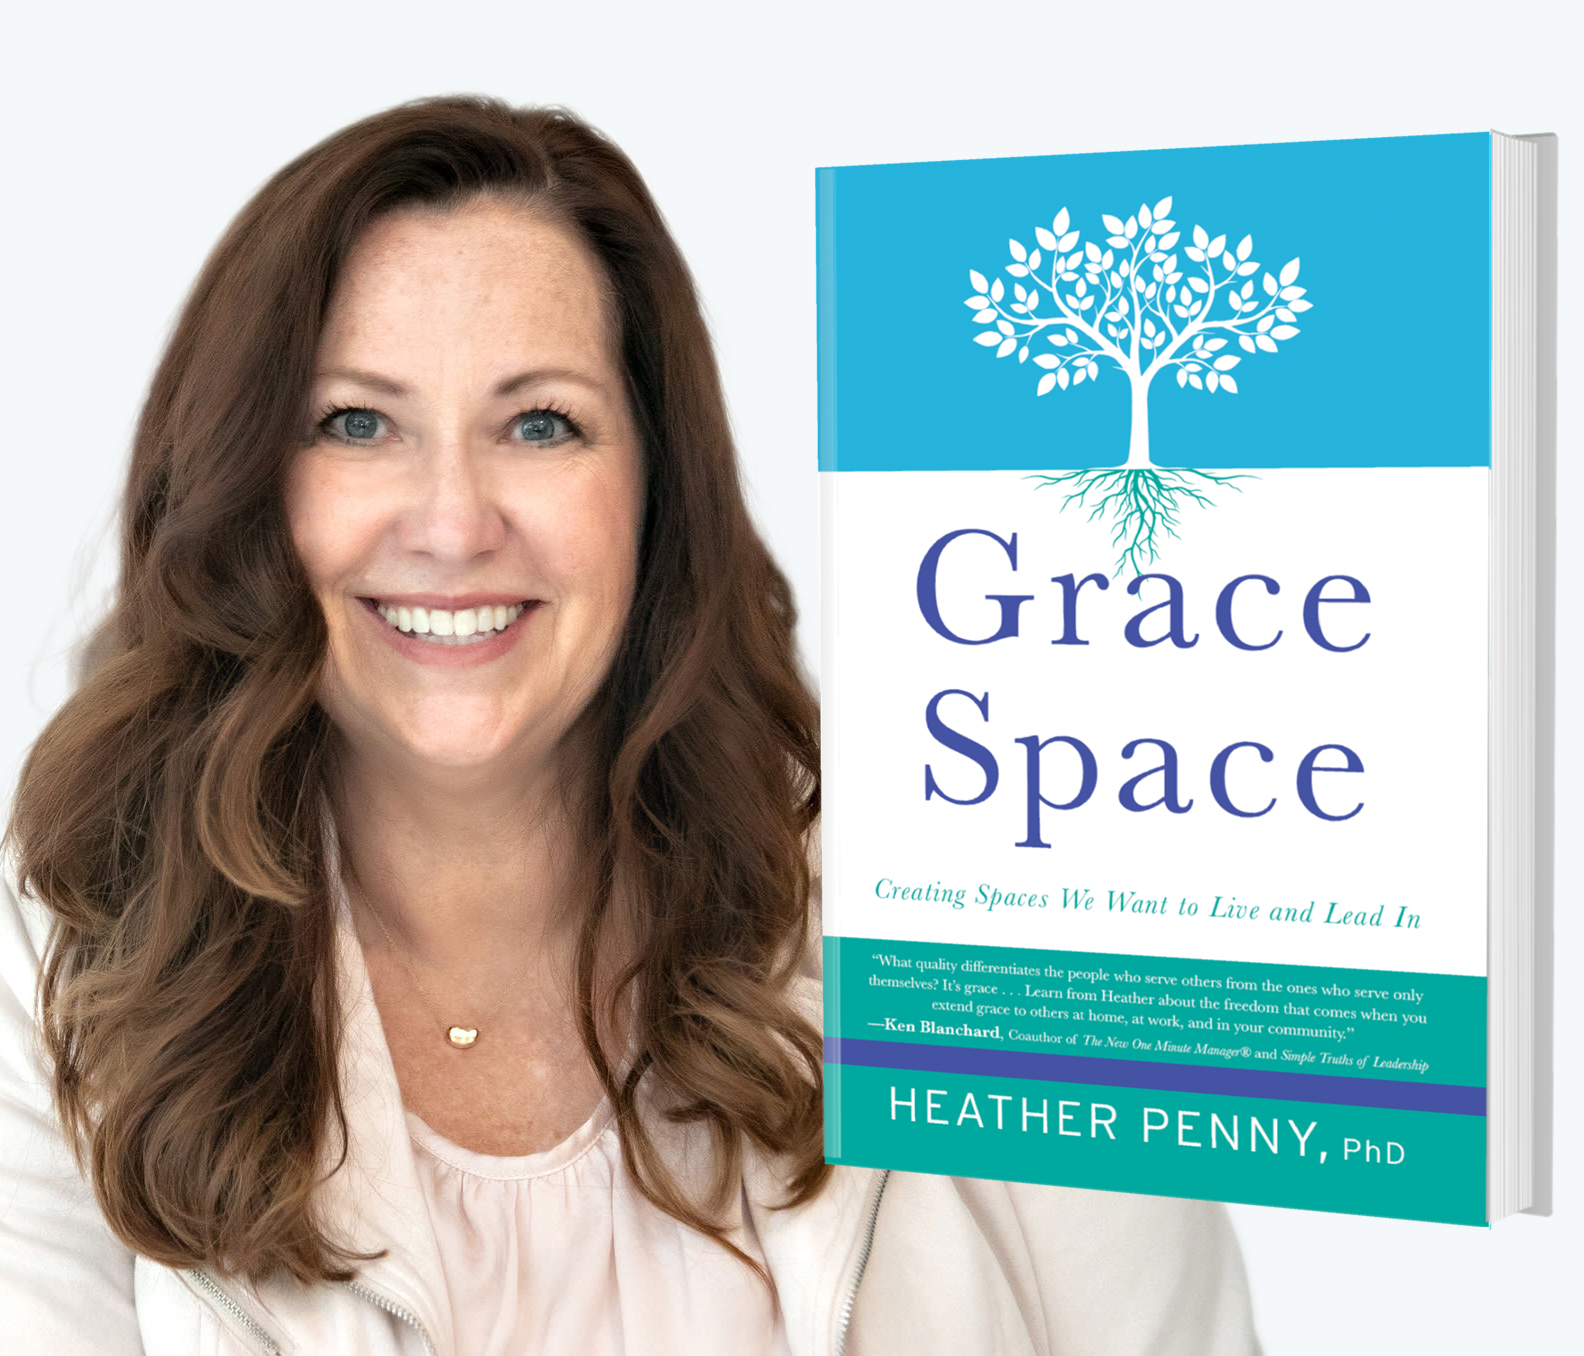 The Life You’re Made For by Heather Penny